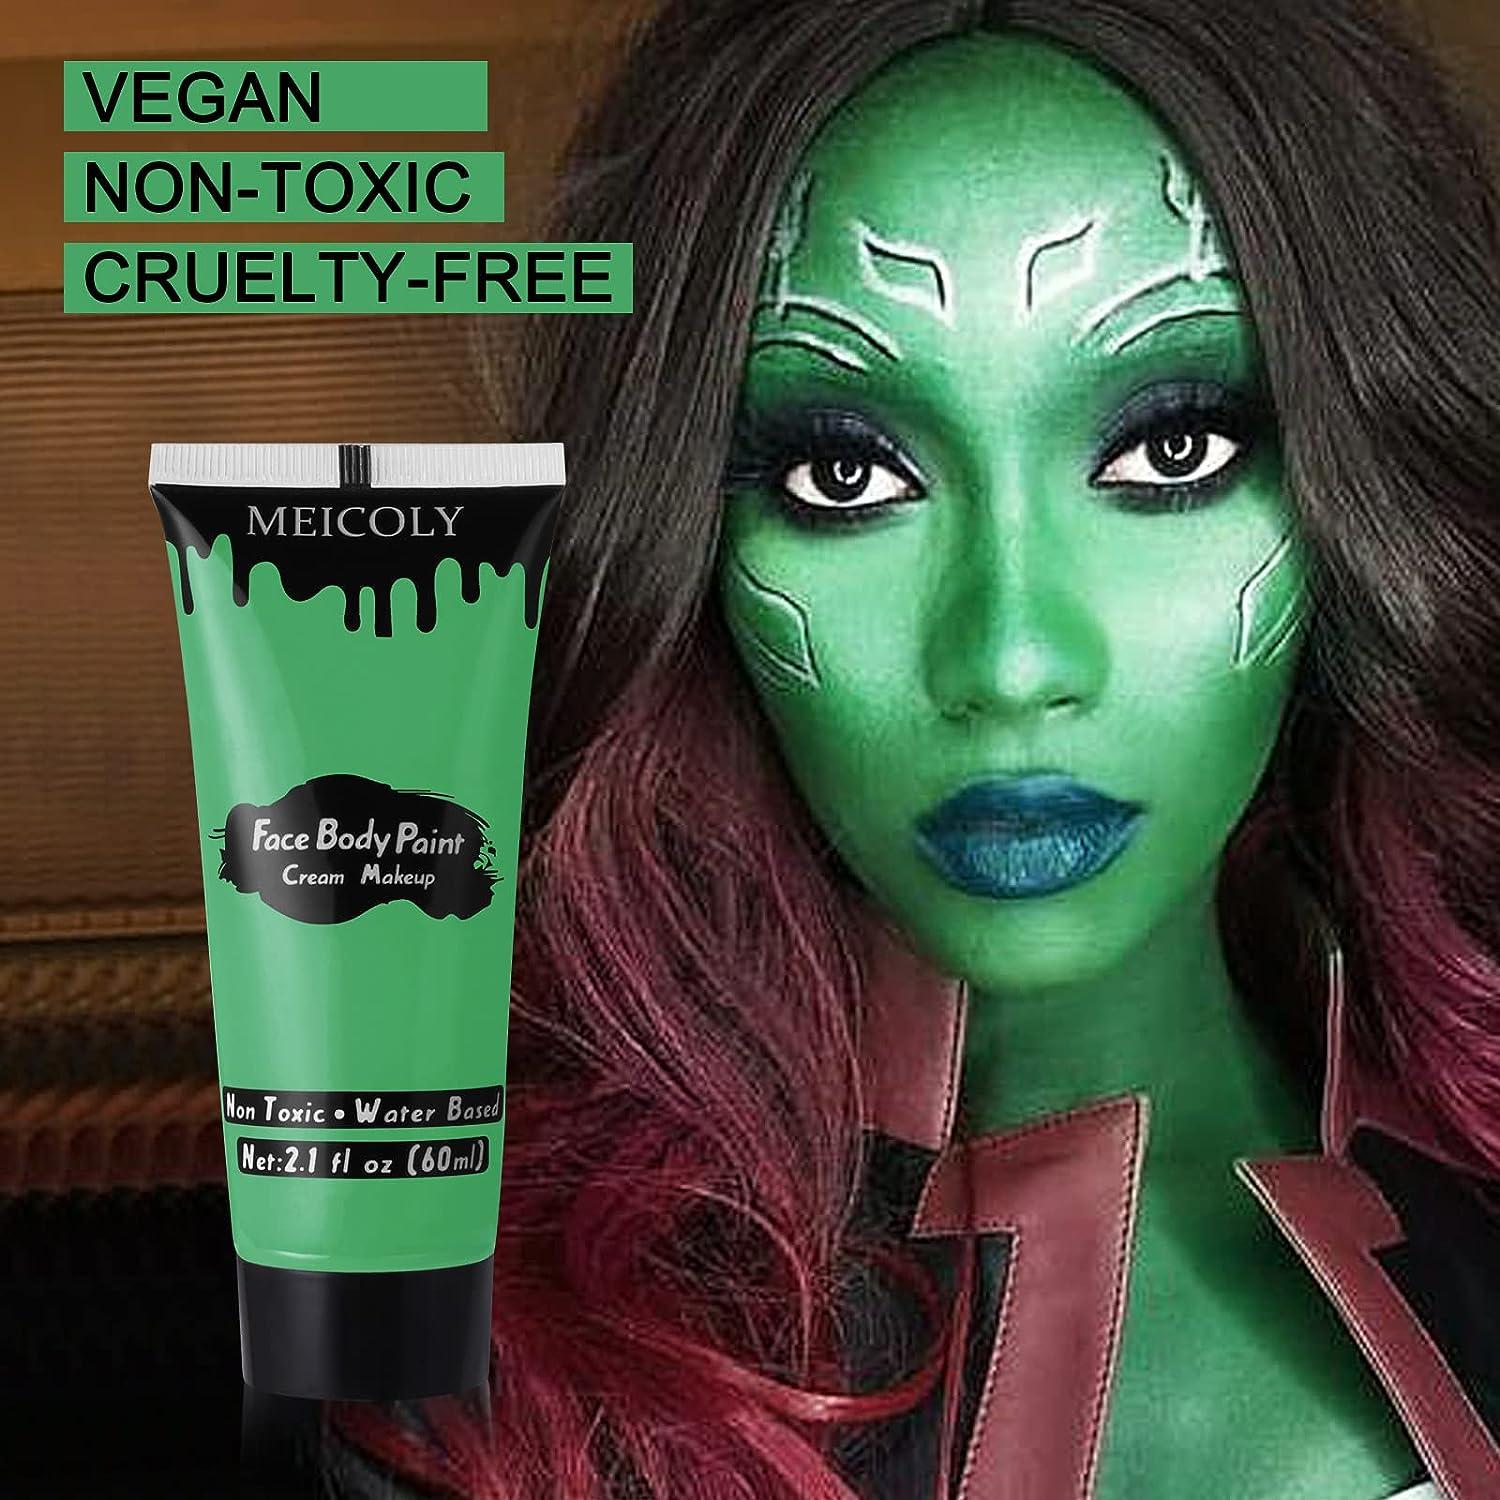 MEICOLY Green Face Body Paint Stick(1.06 Oz) Green Eye Black